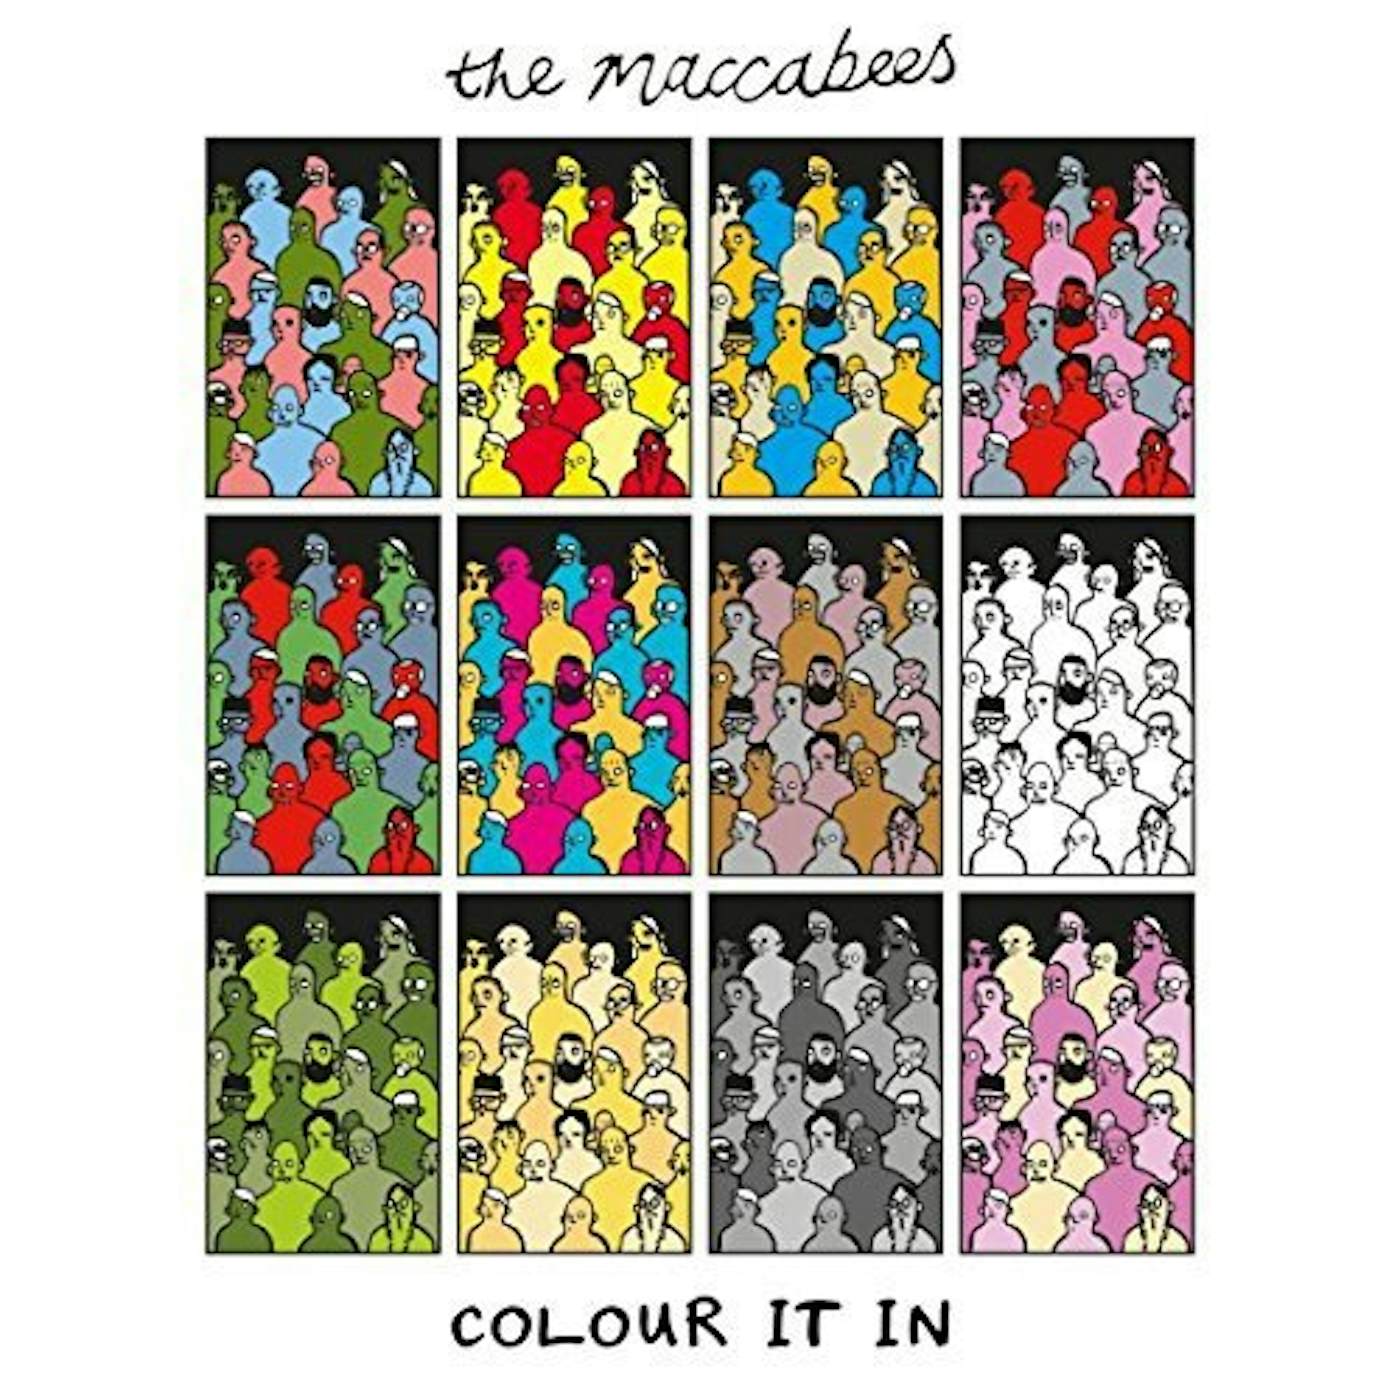 Maccabees COLOUR IT IN Vinyl Record - UK Release